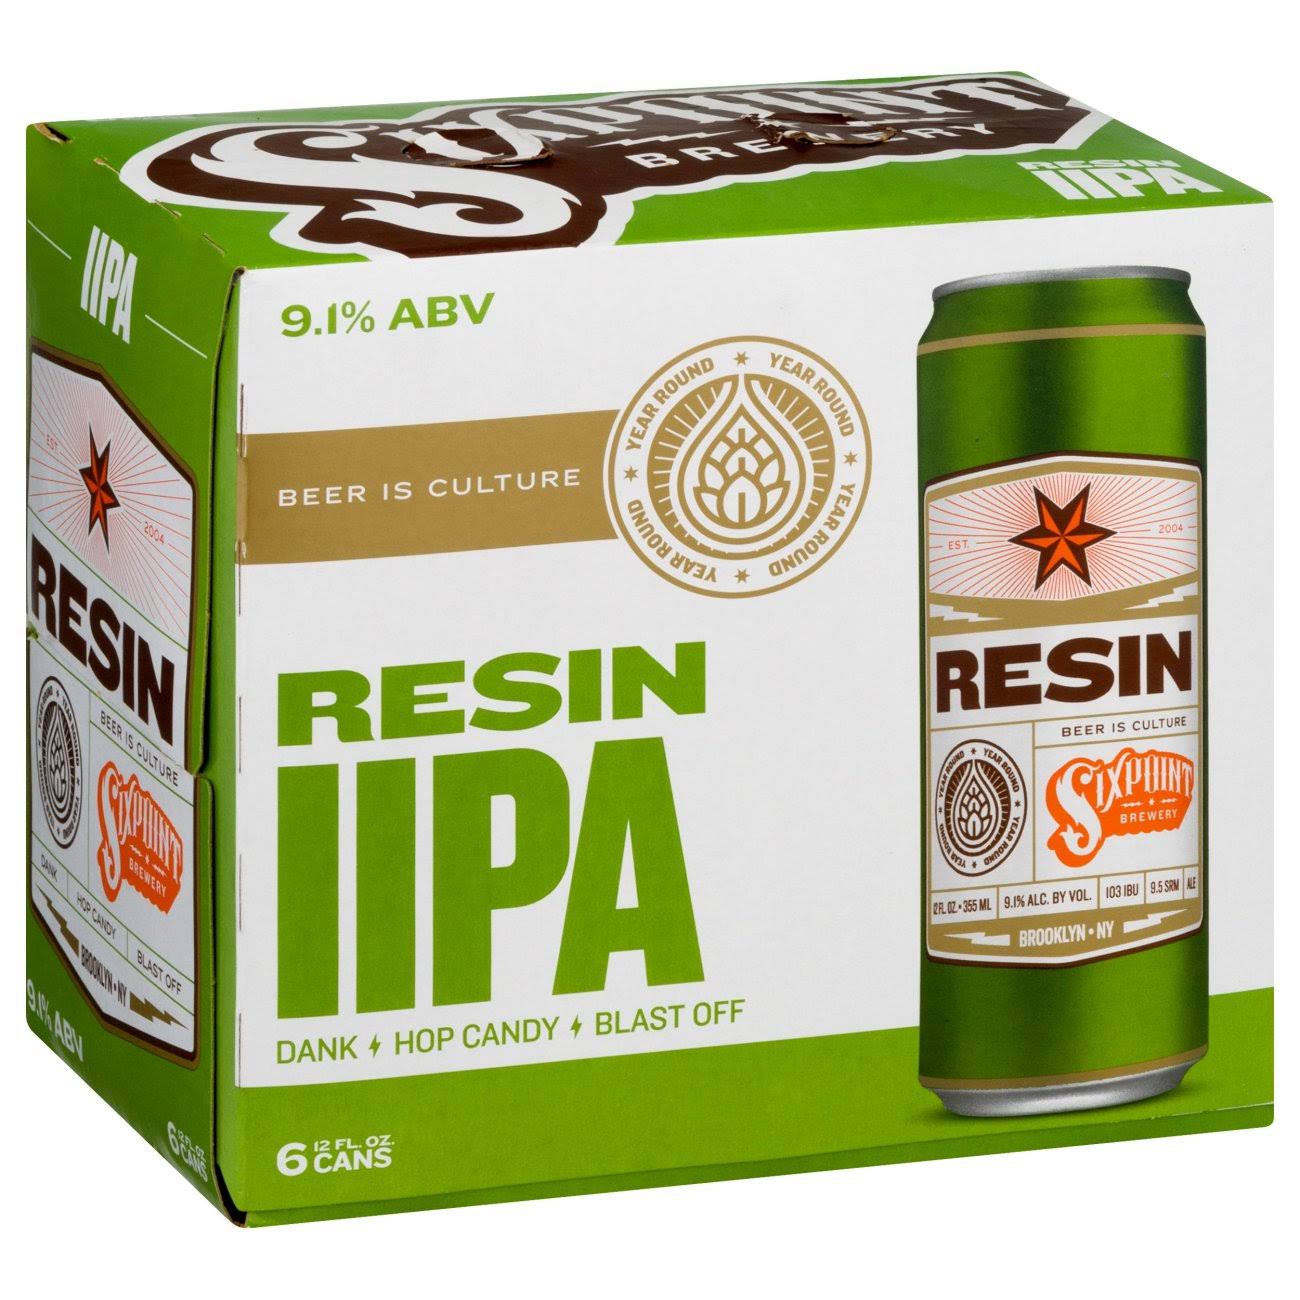 Sixpoint Brewery Resin Beer, DIPA - 6 pack, 12 fl oz cans